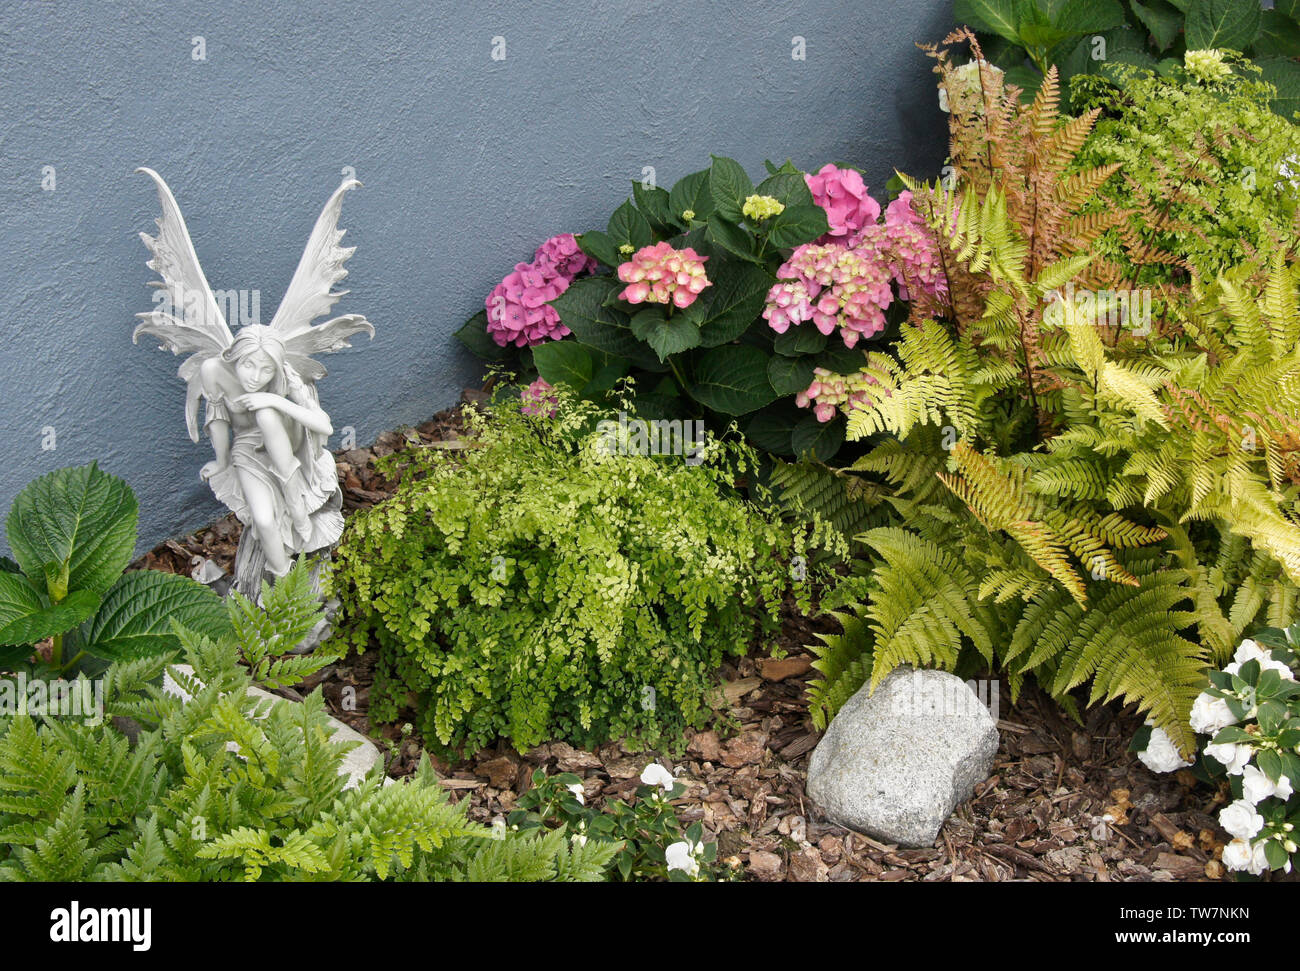 A fairy sculpture sits in a garden of hydrangeas, ferns, and impatiens Stock Photo